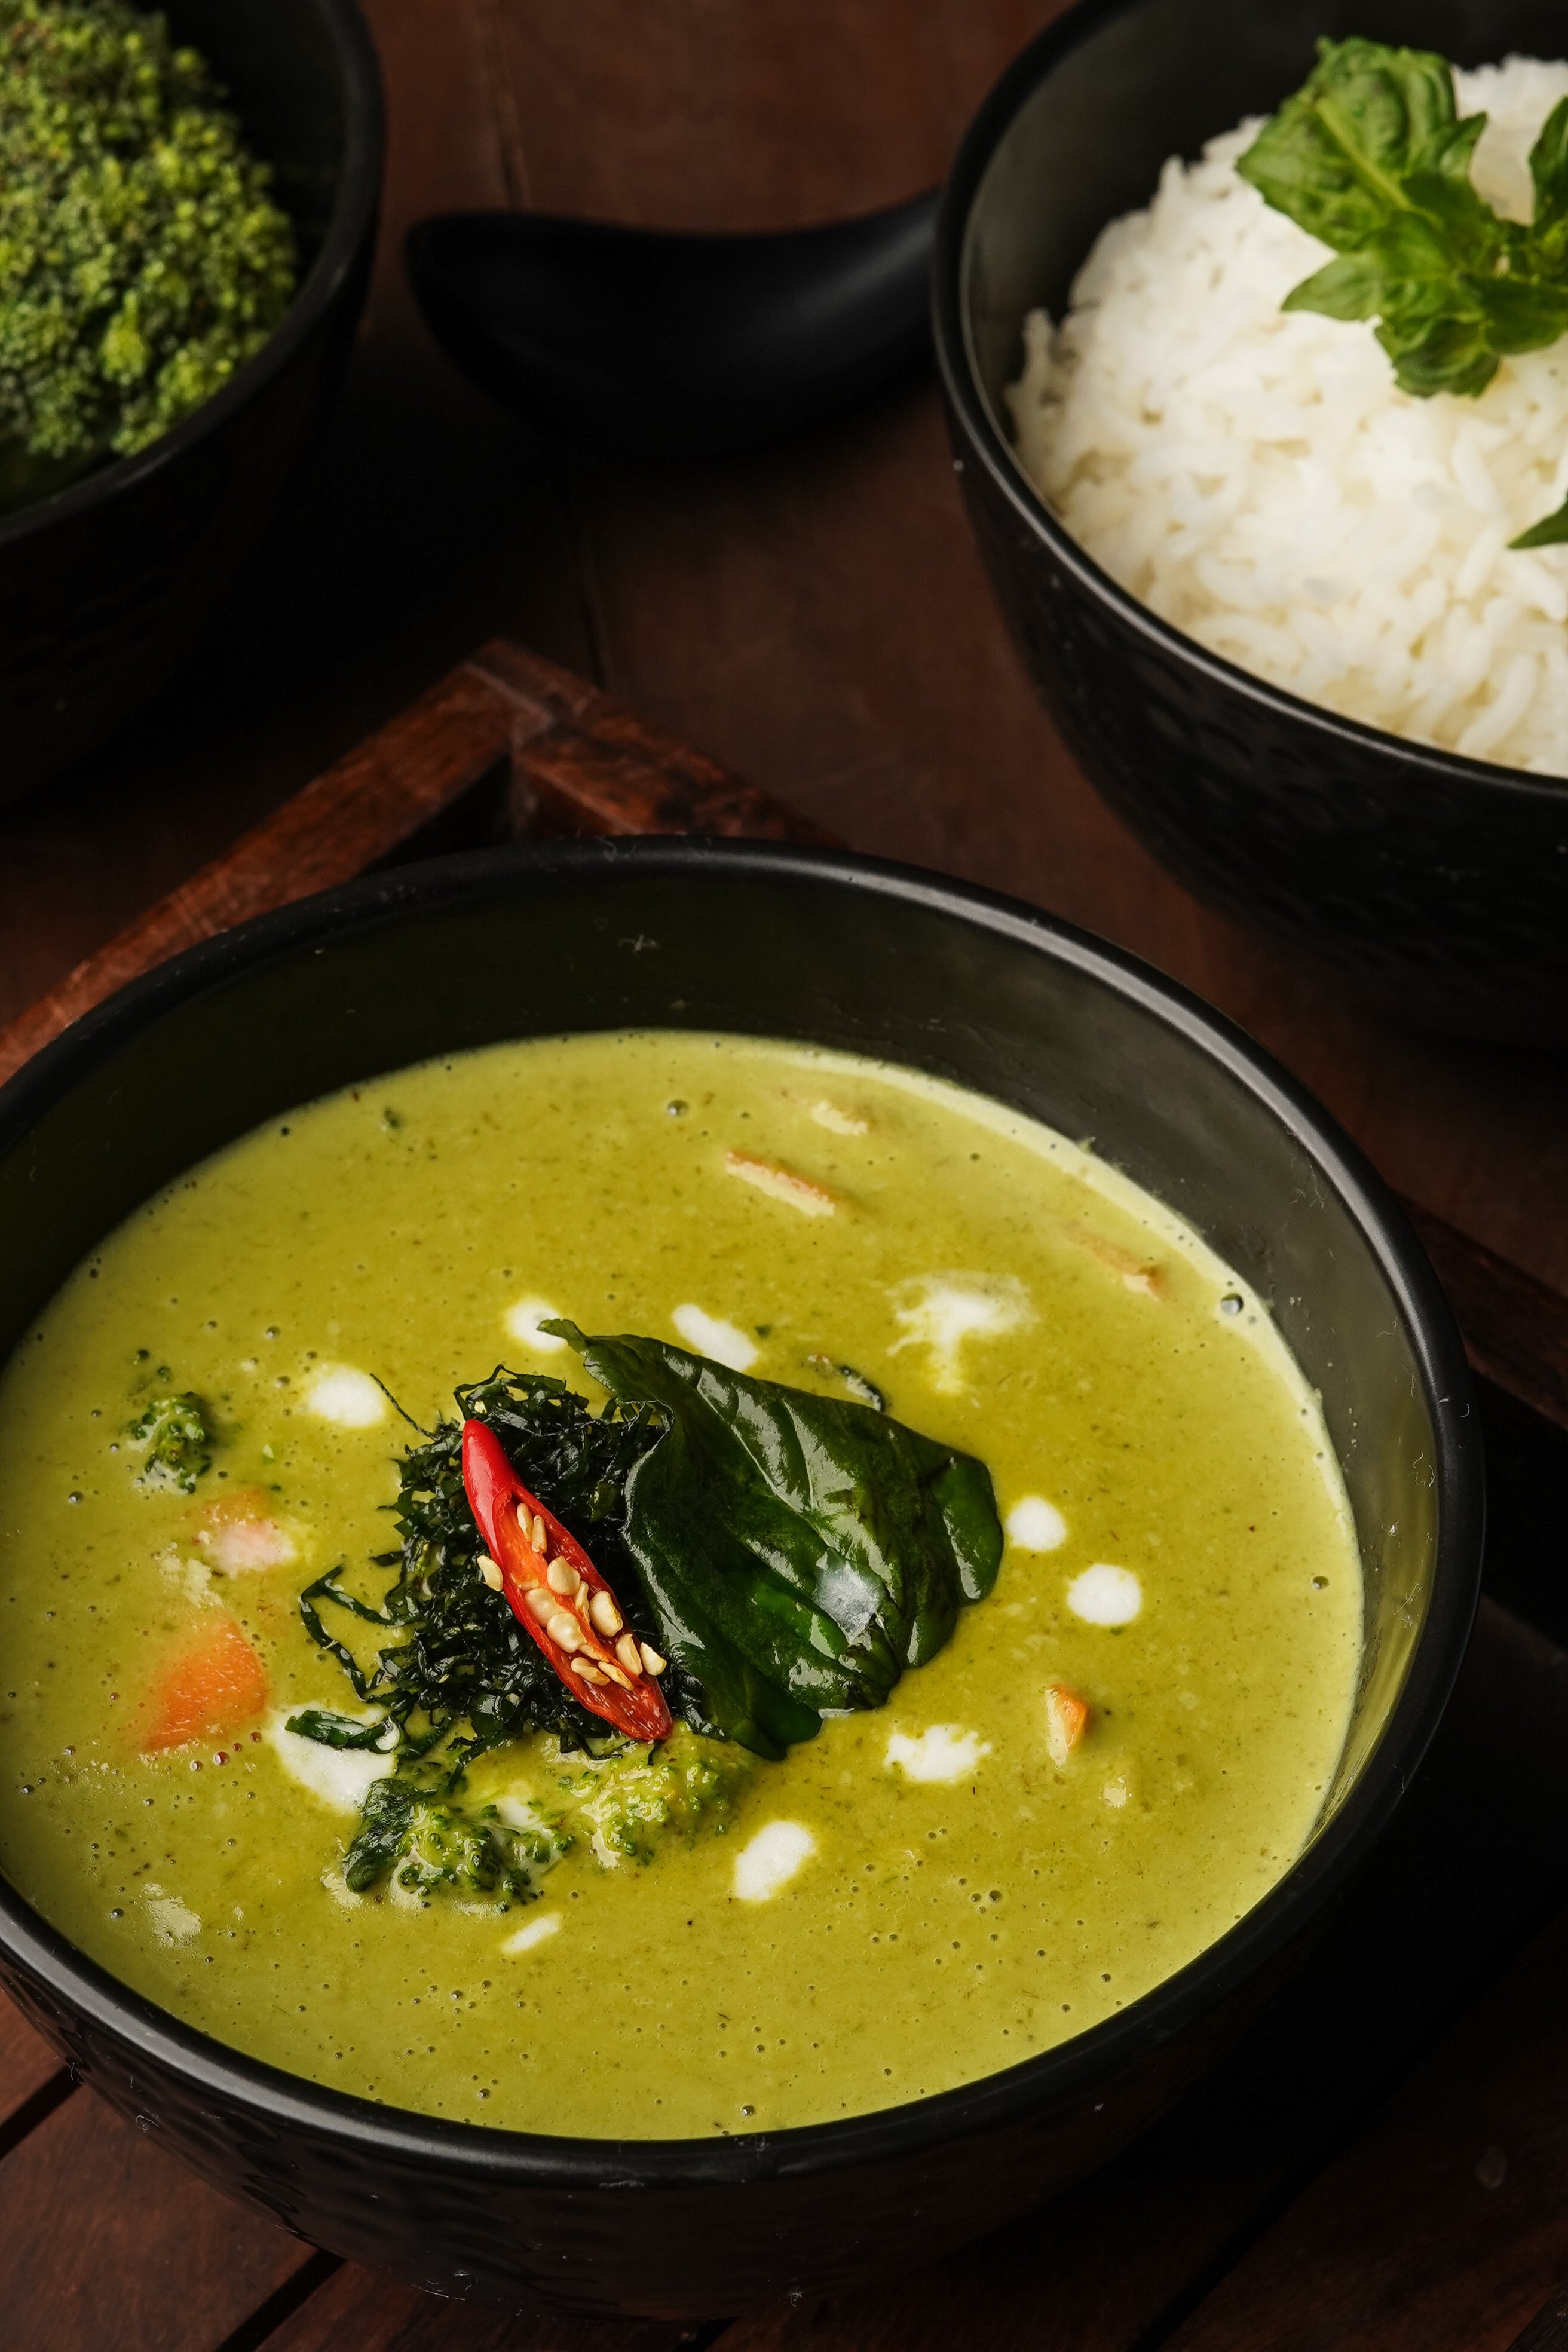 Food,Tableware,Ingredient,Recipe,Cuisine,White rice,Dish,Condiment,Green curry,Leaf vegetable